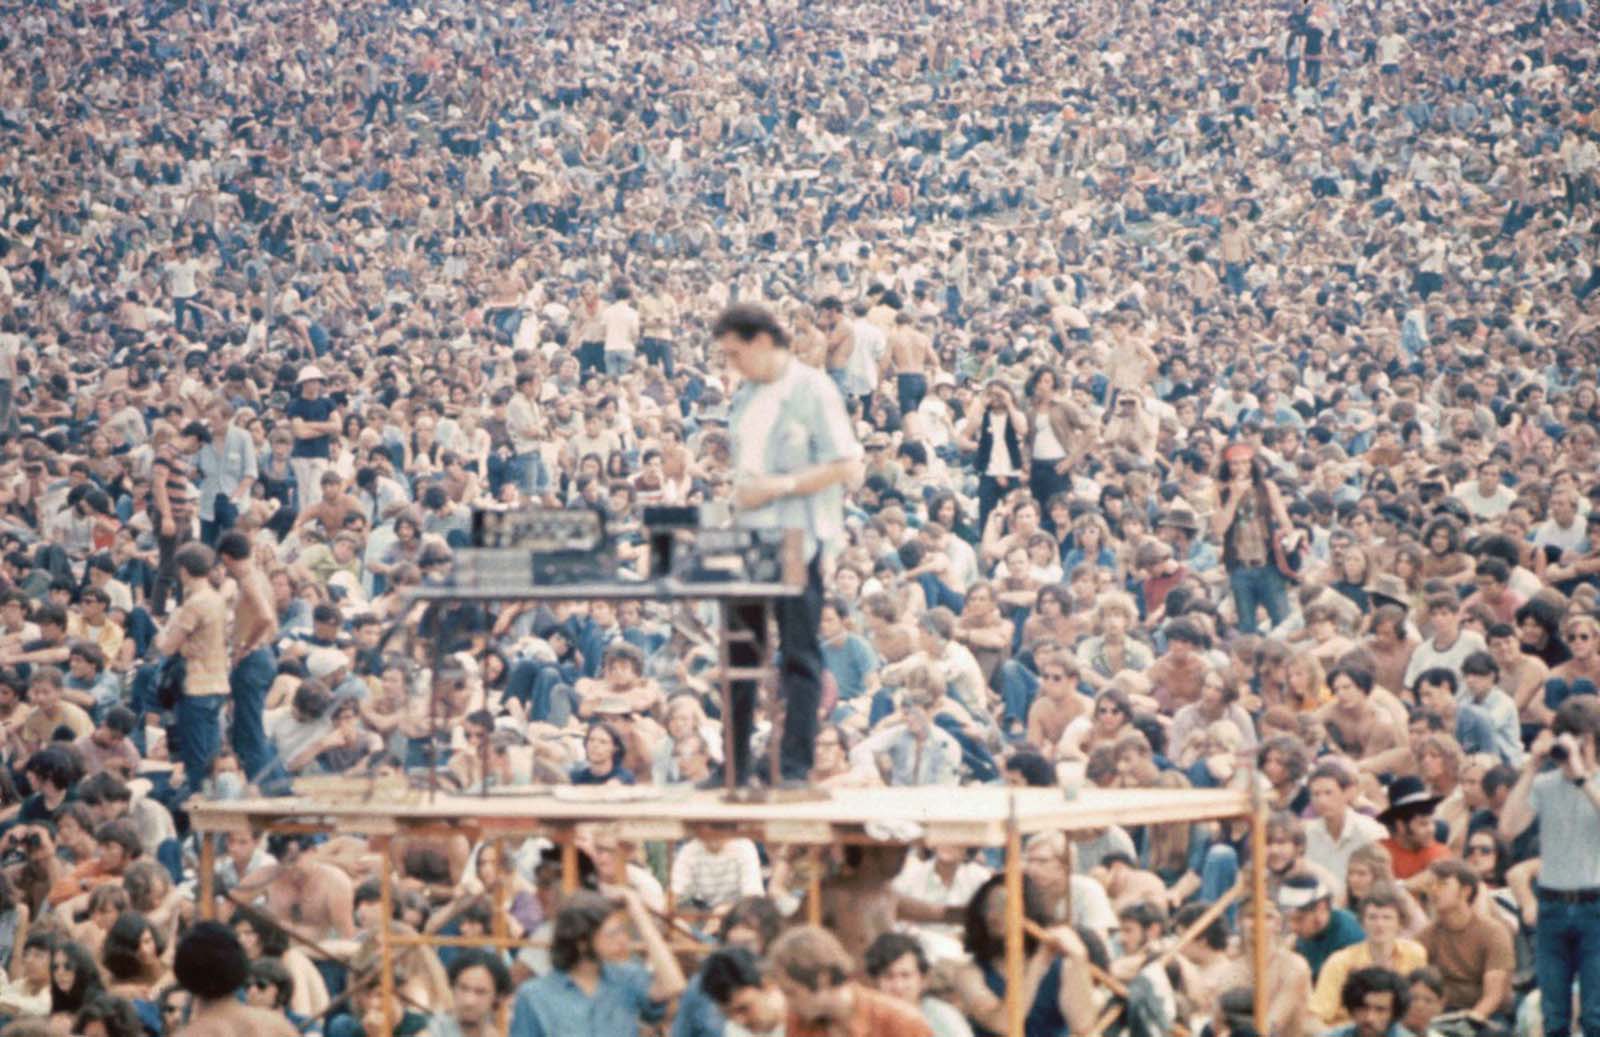 A sound man stands on scaffolding with his equipment in front of the Woodstock crowd.